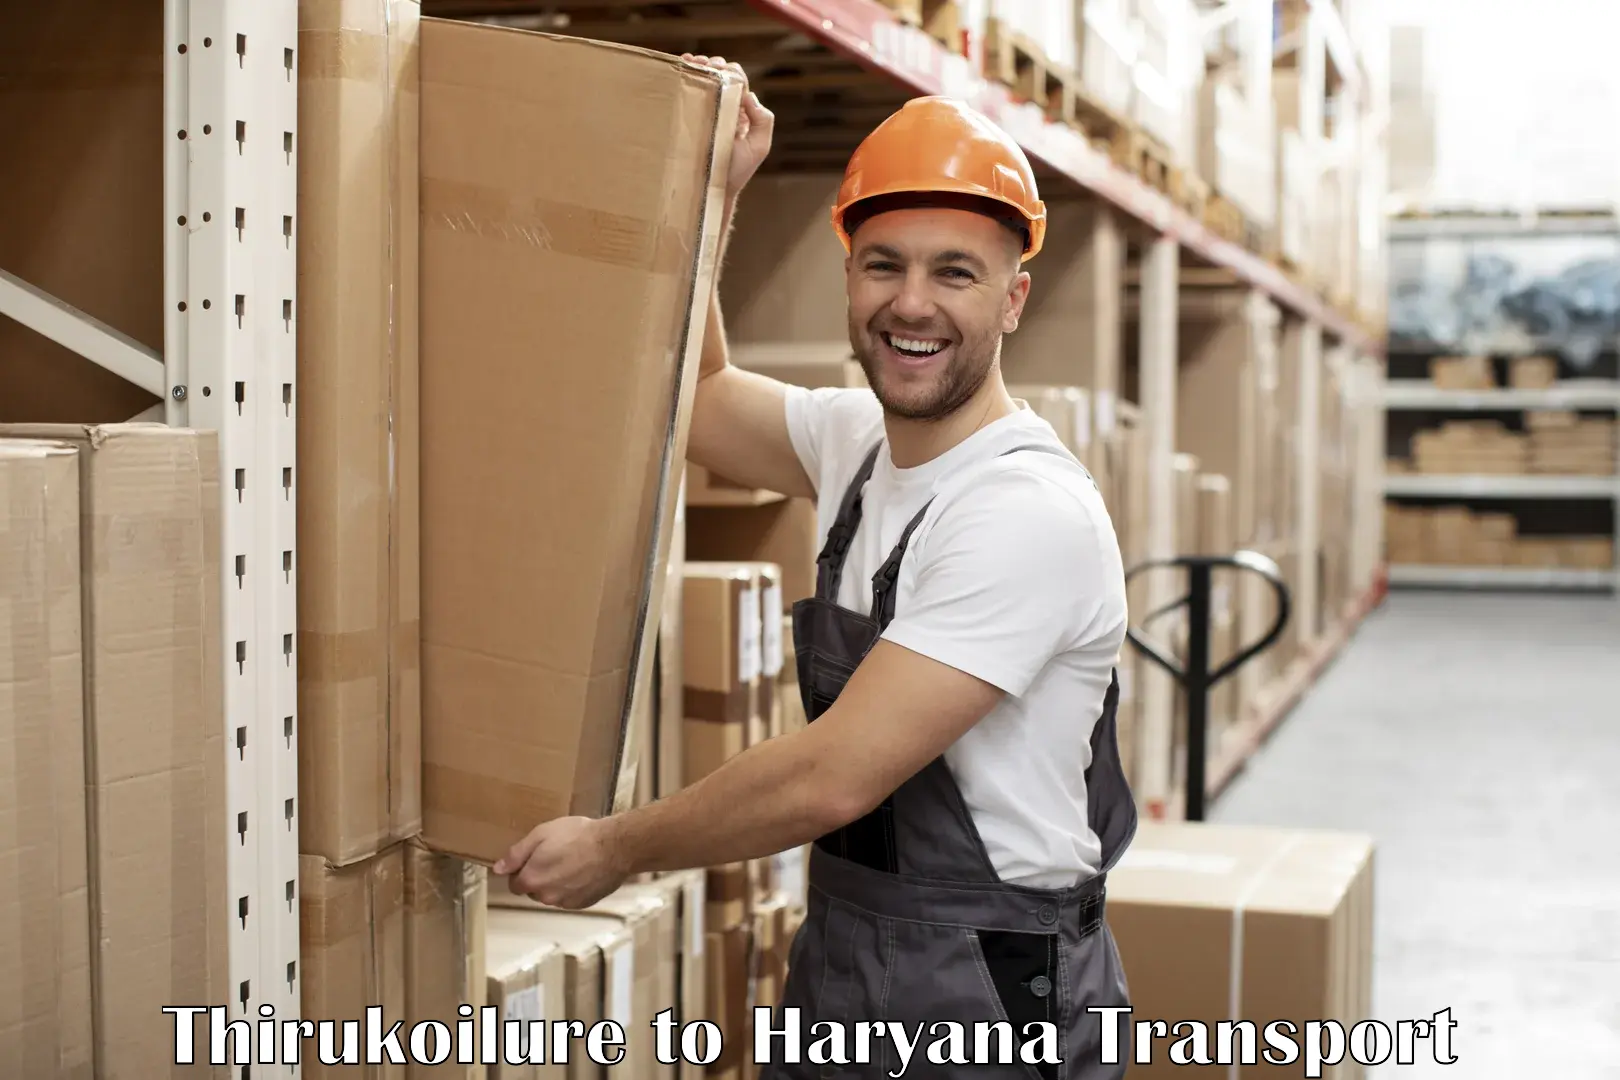 Commercial transport service Thirukoilure to Bhiwani